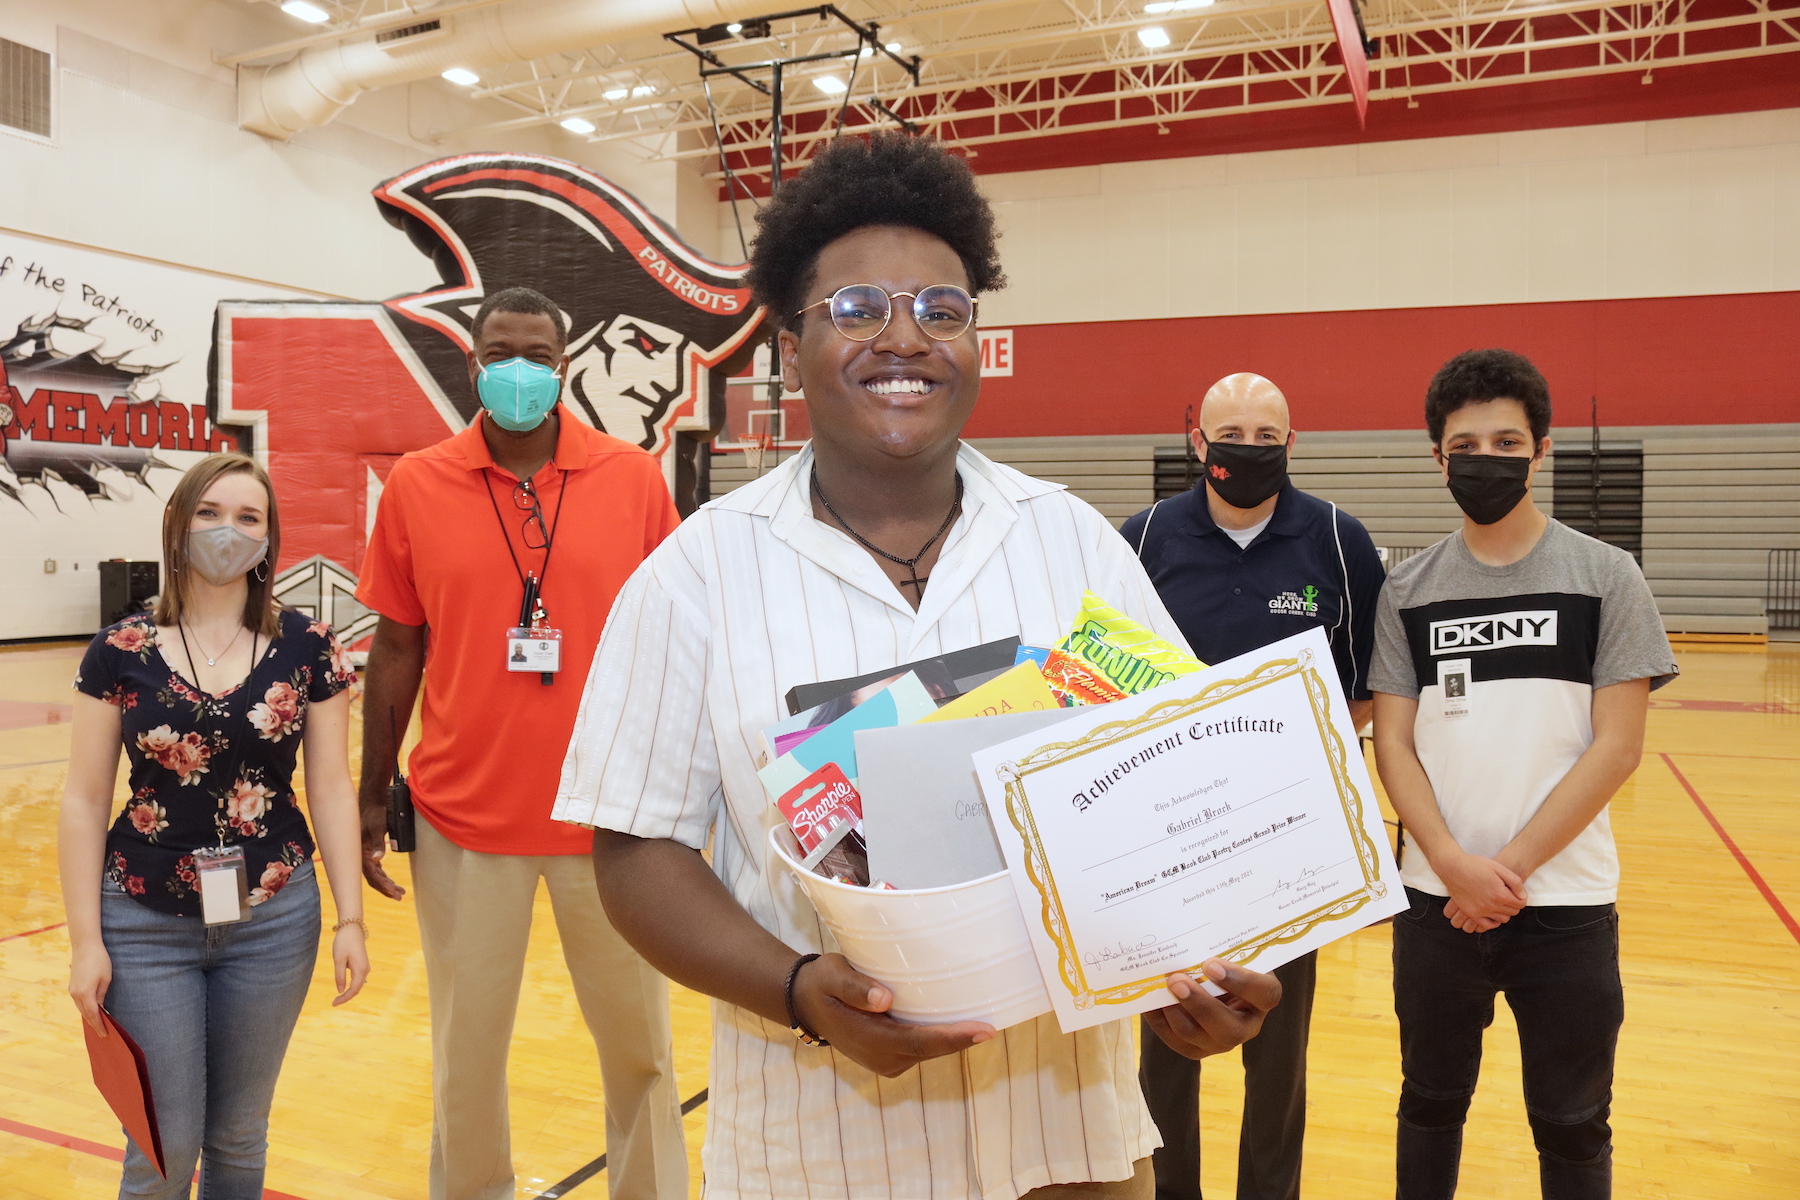 Poetry Contest Winner poses with award